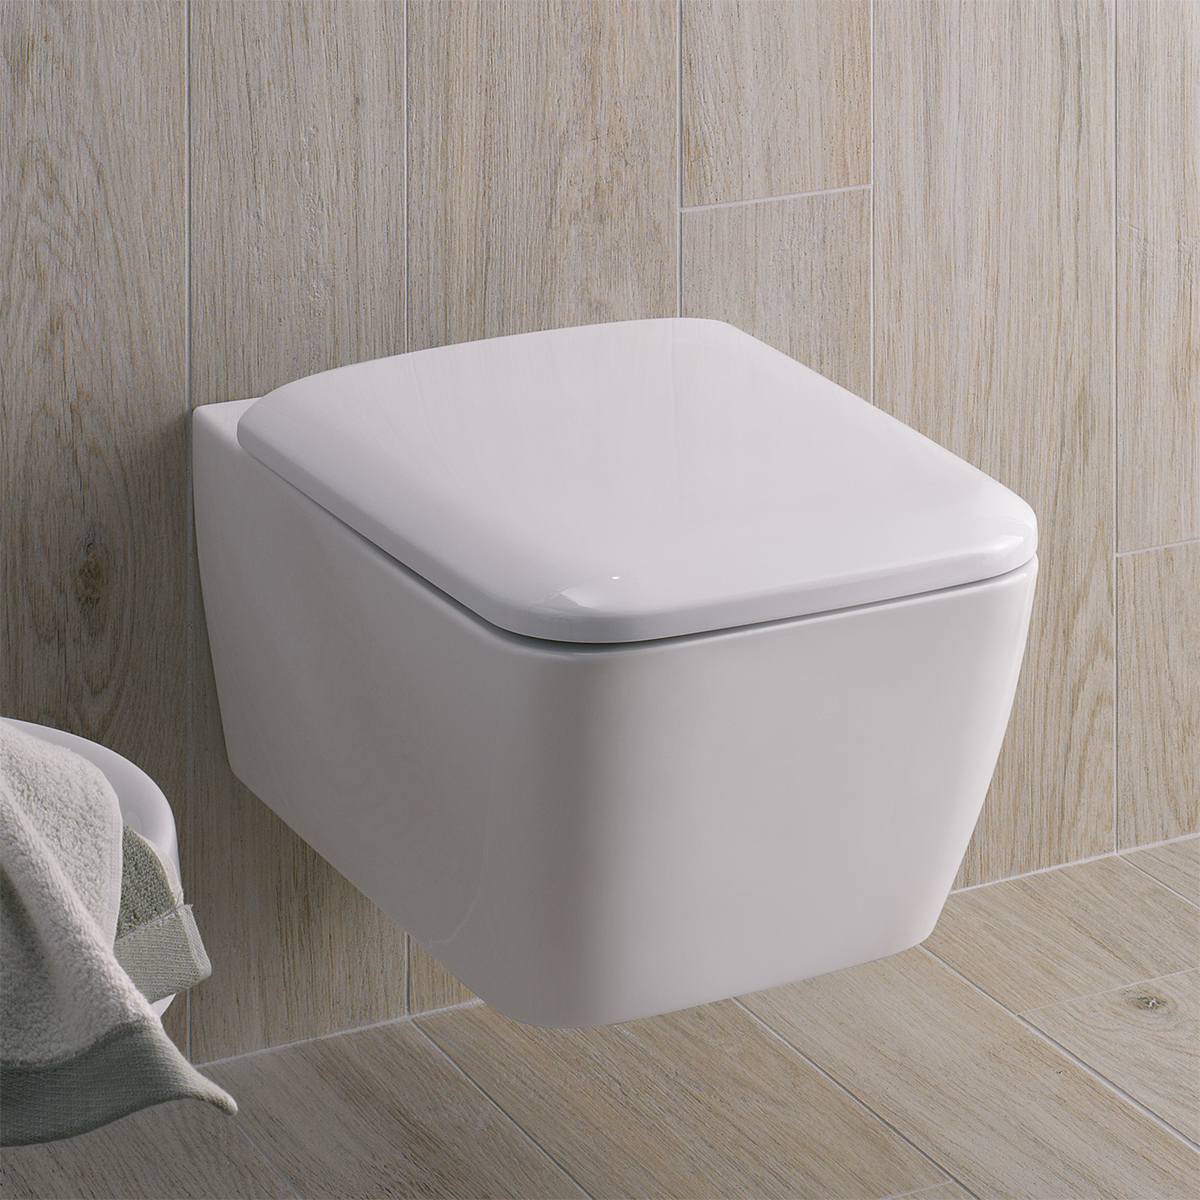 ICON SQUARE WALL HUNG WC WASHDOWN SHROUDED RIMFREE WHITE GEBERIT